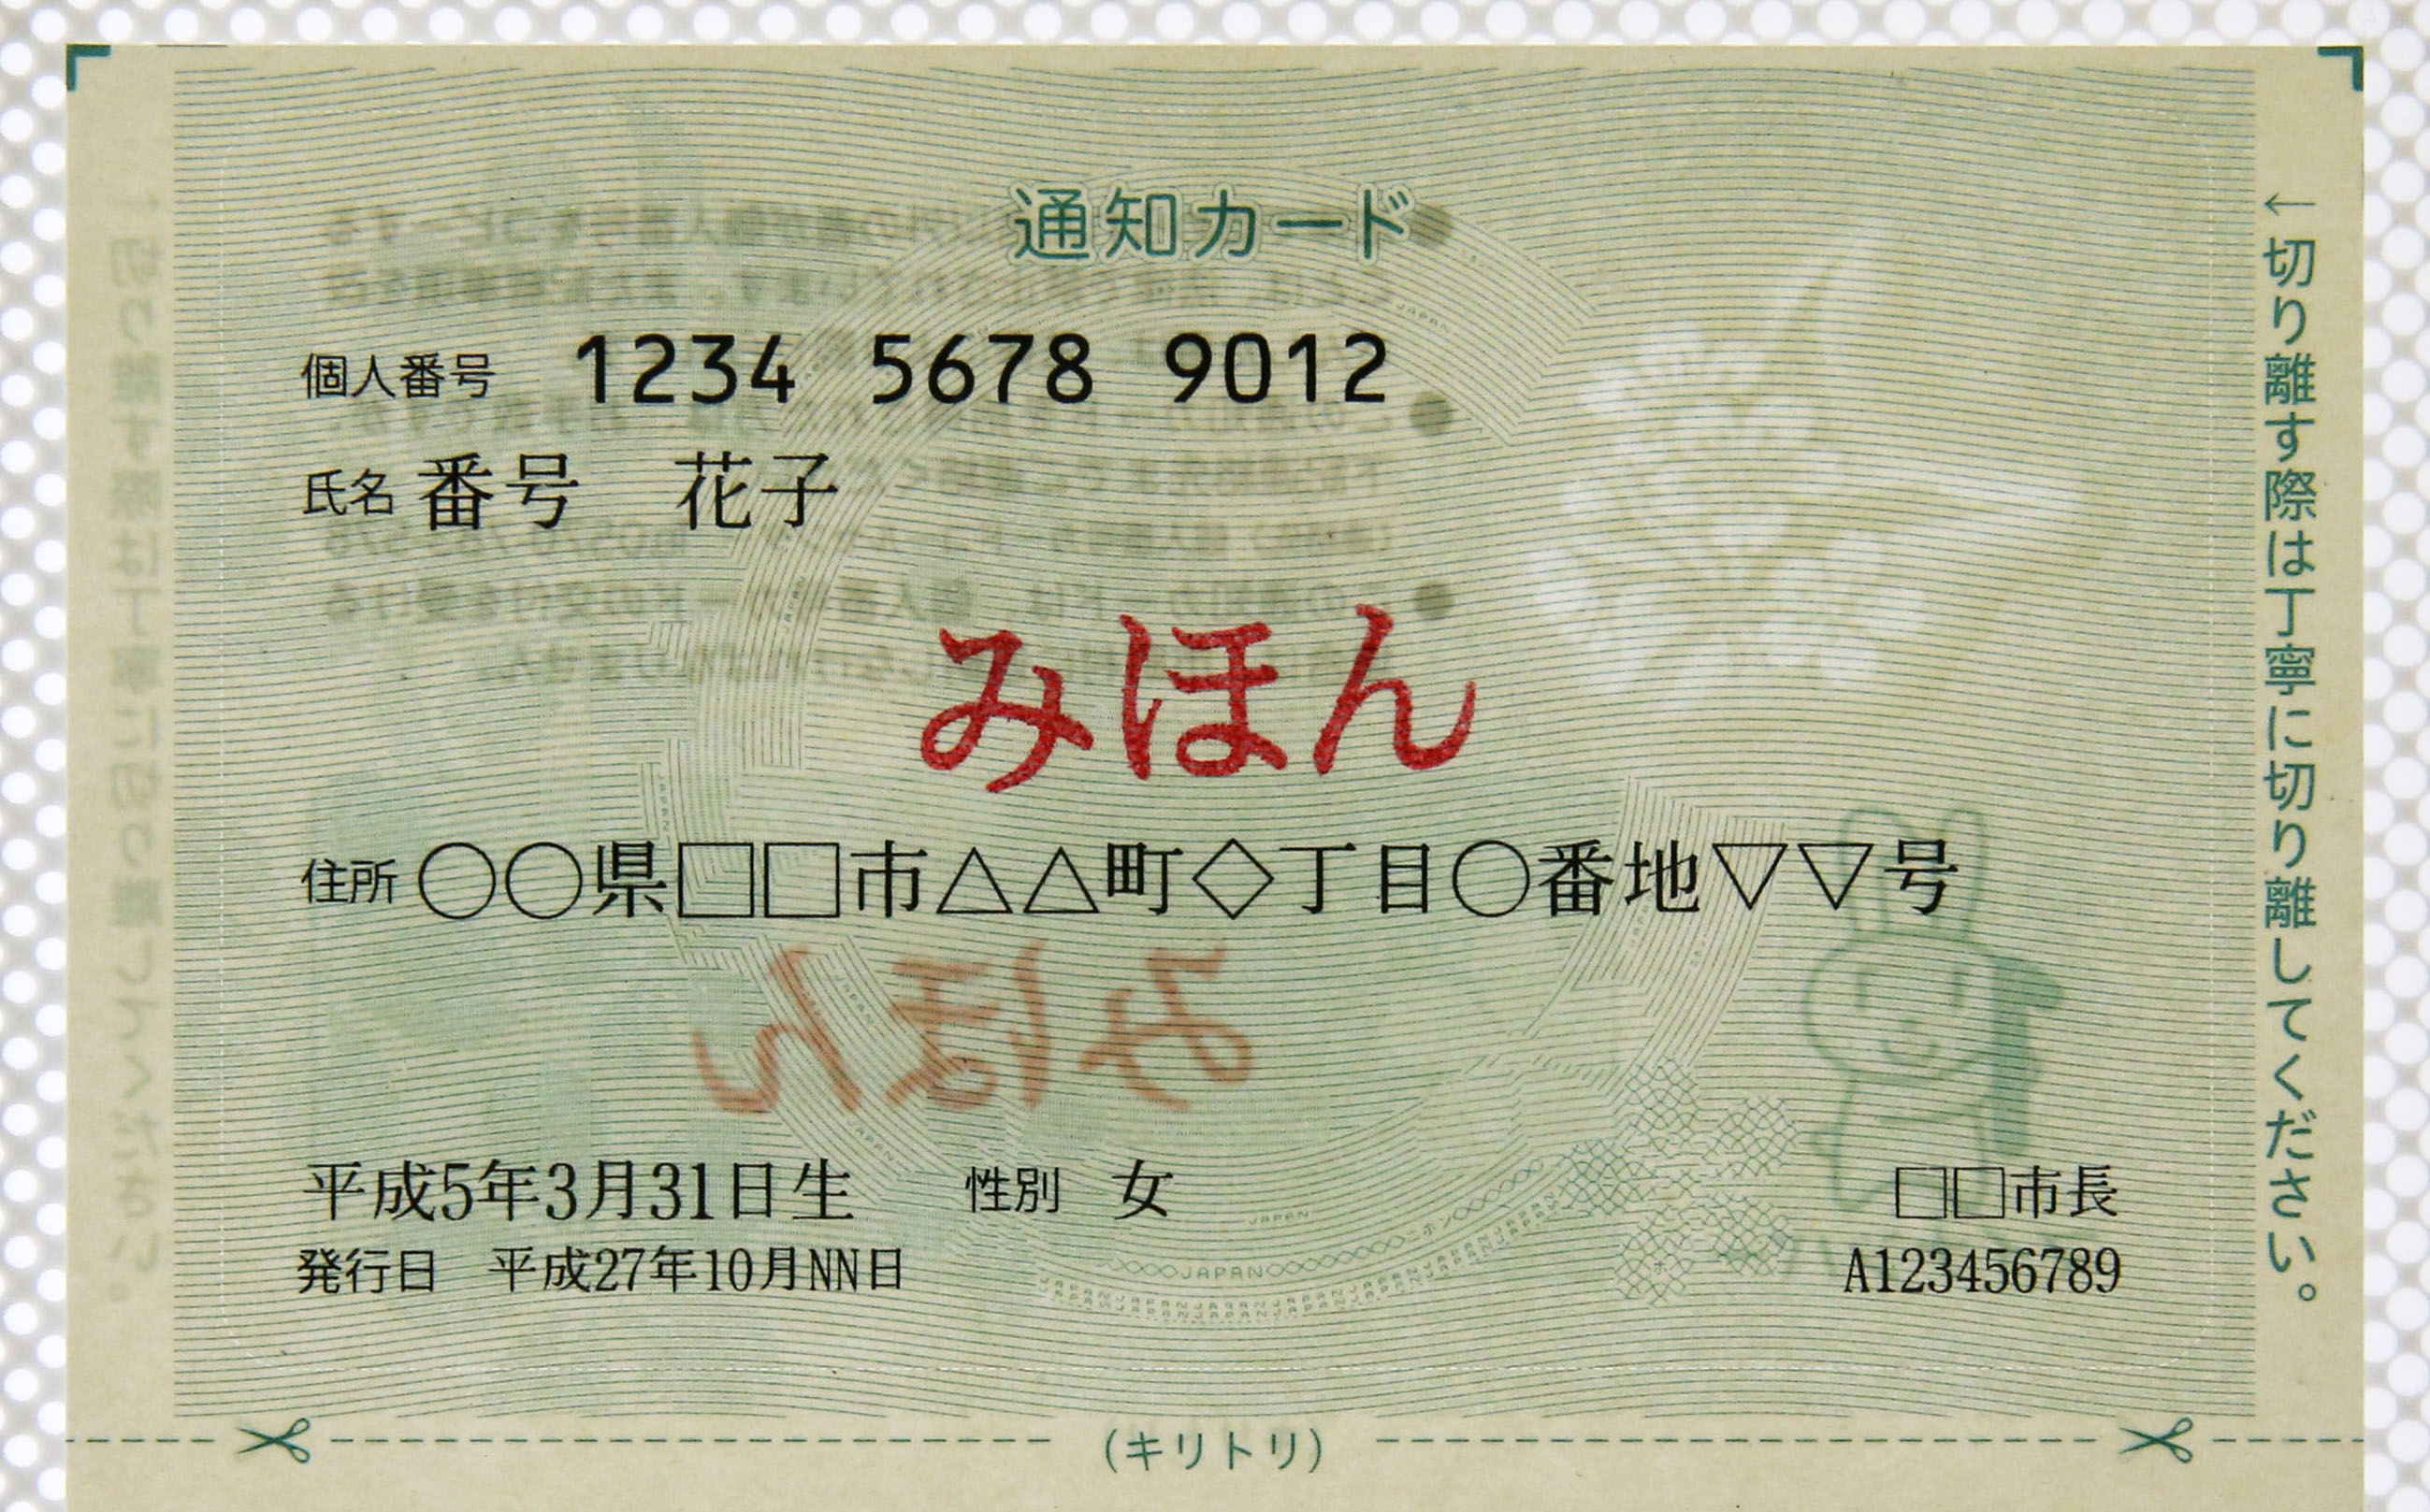 This sample notification card for the My Number system bears a 12-digit number, followed by the name, address, date of birth and gender of the individual, as well as the date of issue and the municipality where it was issued. | KYODO